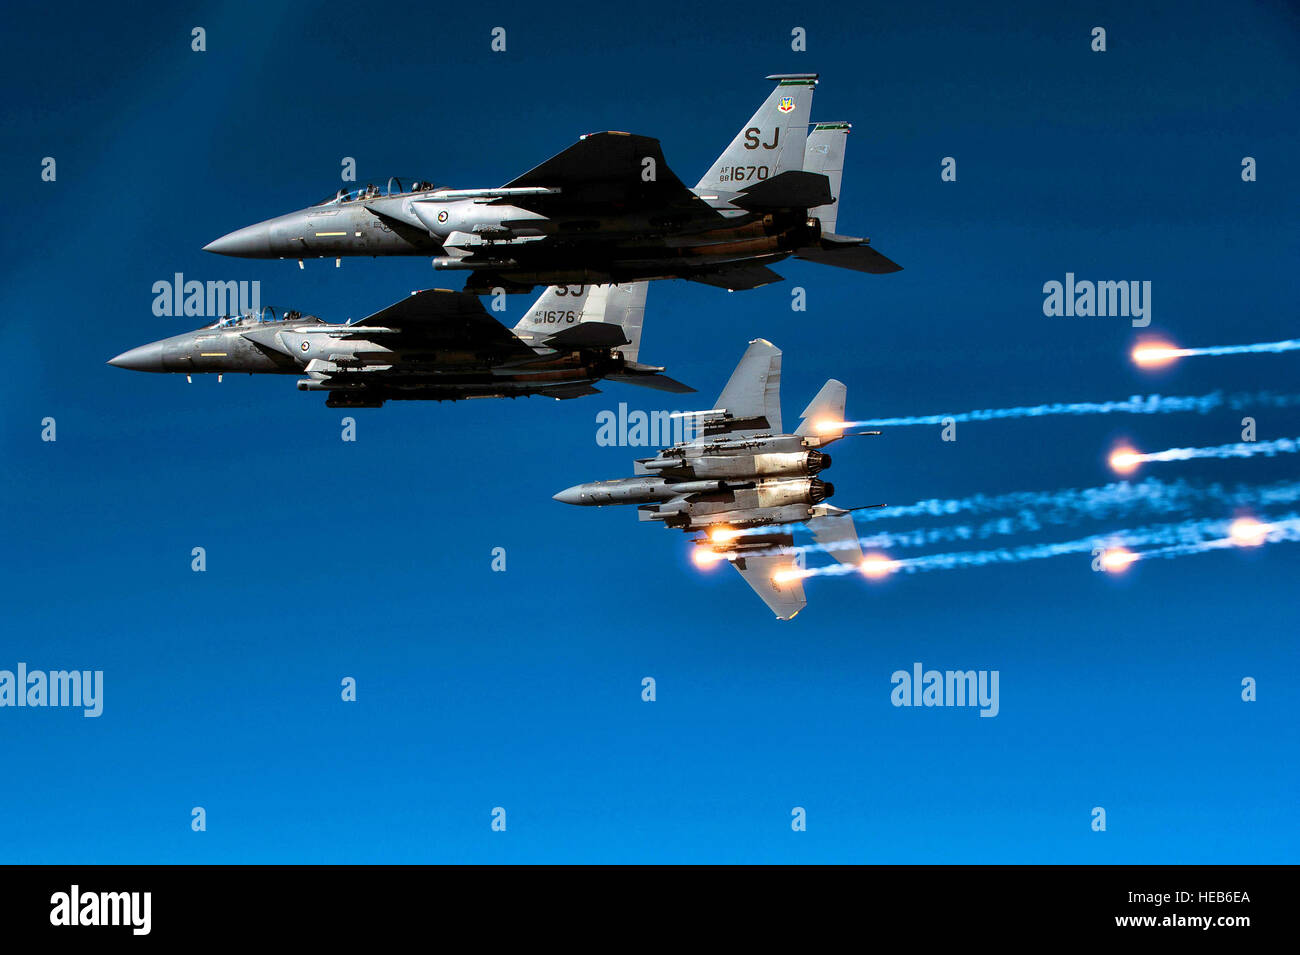 A U.S. Air Force F-15E Strike Eagle aircraft from the 335th Fighter Squadron releases flares during a local training mission over North Carolina, Dec. 17, 2010.   Staff Sgt. Michael B. Keller) Stock Photo